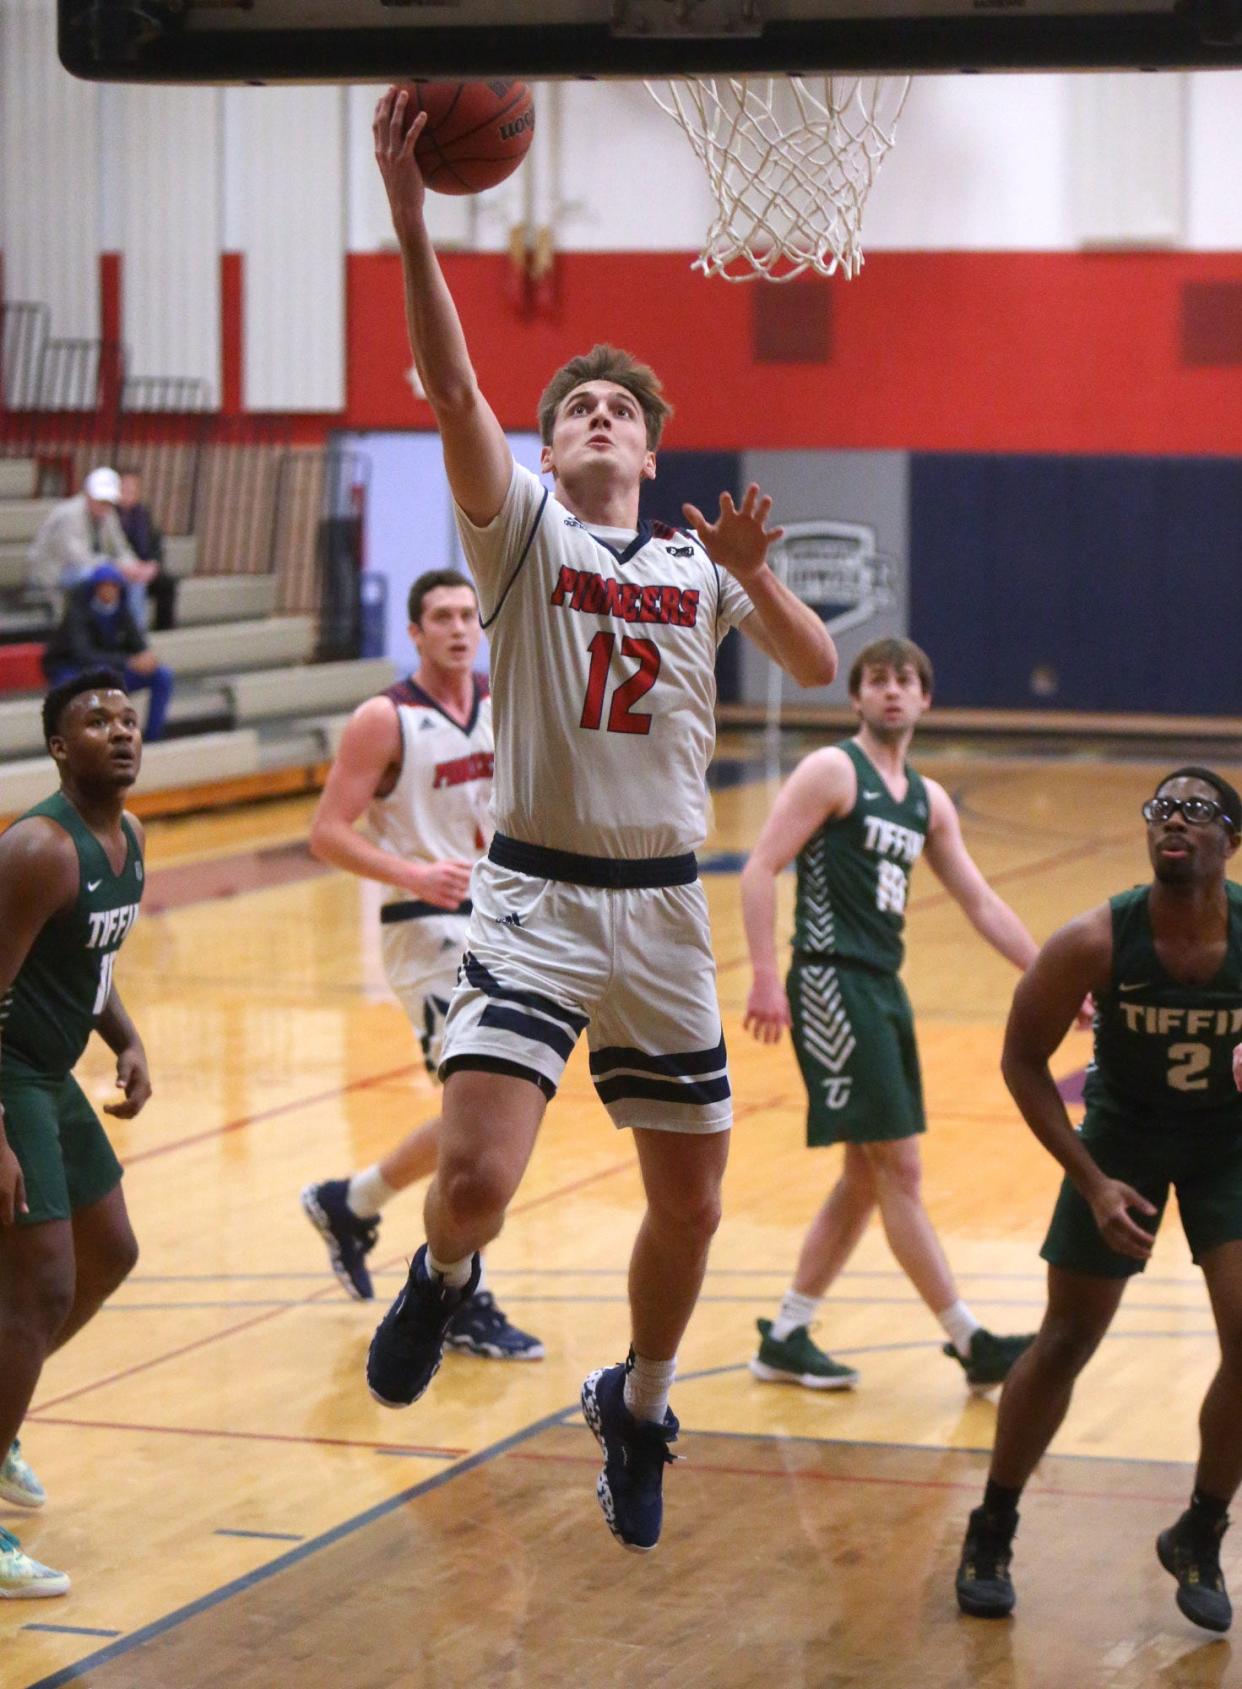 Bo Myers, 12, of Malone, goes to the basket during their game against Tiffin at Malone on Monday, Jan. 3, 2022.